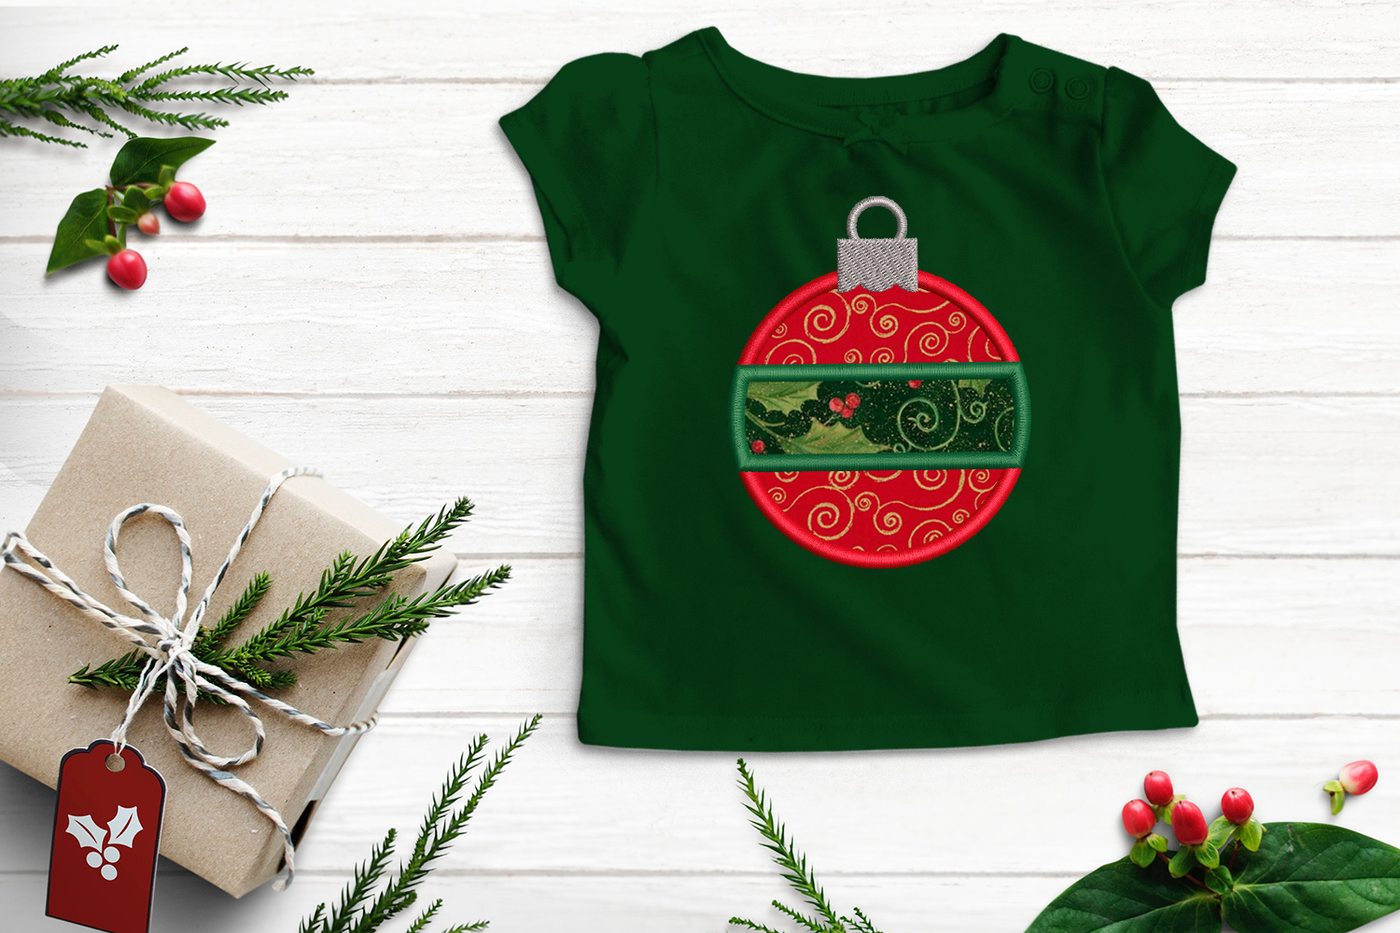 A green child's shirt sits on a white surface with a present and evergreen sprigs around it. Embroidered on the shirt is a round applique ornament with a contrasting center band. The applique fabric is red with gold swirls on the top and bottom and the center band applique is green with holly.